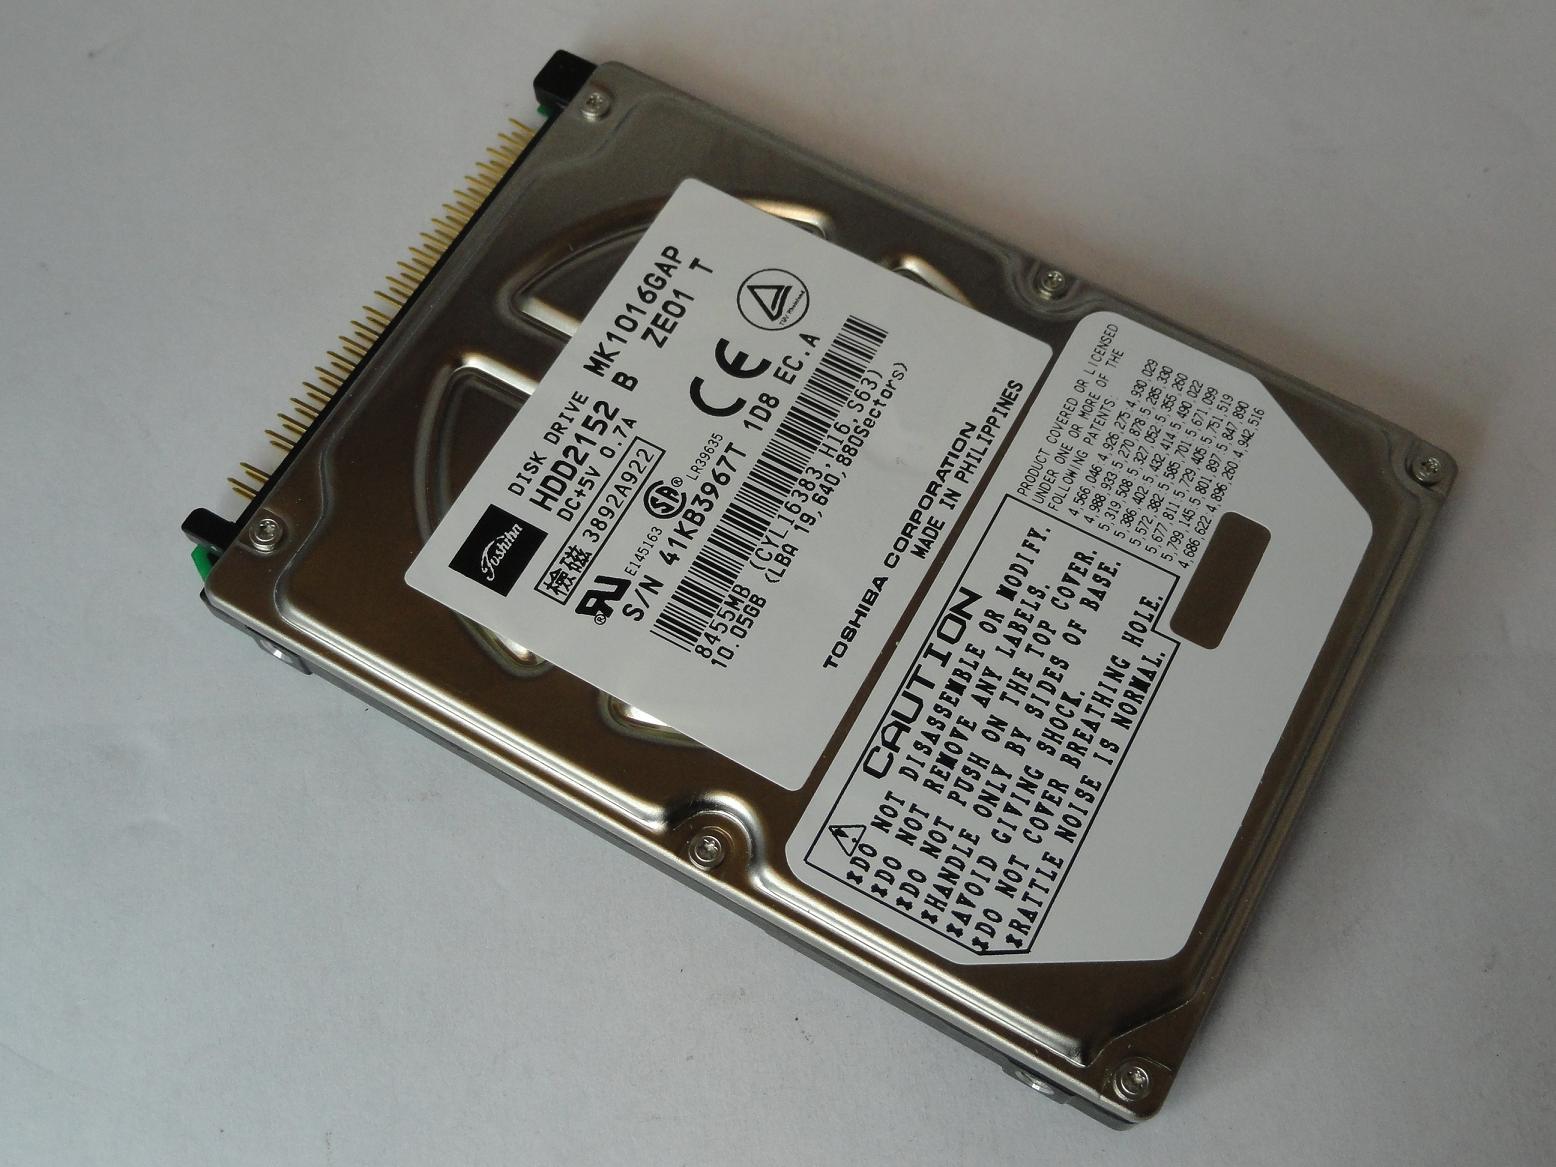 HDD2152 - Toshiba 10GB IDE 4200rpm 2.5in HDD - USED